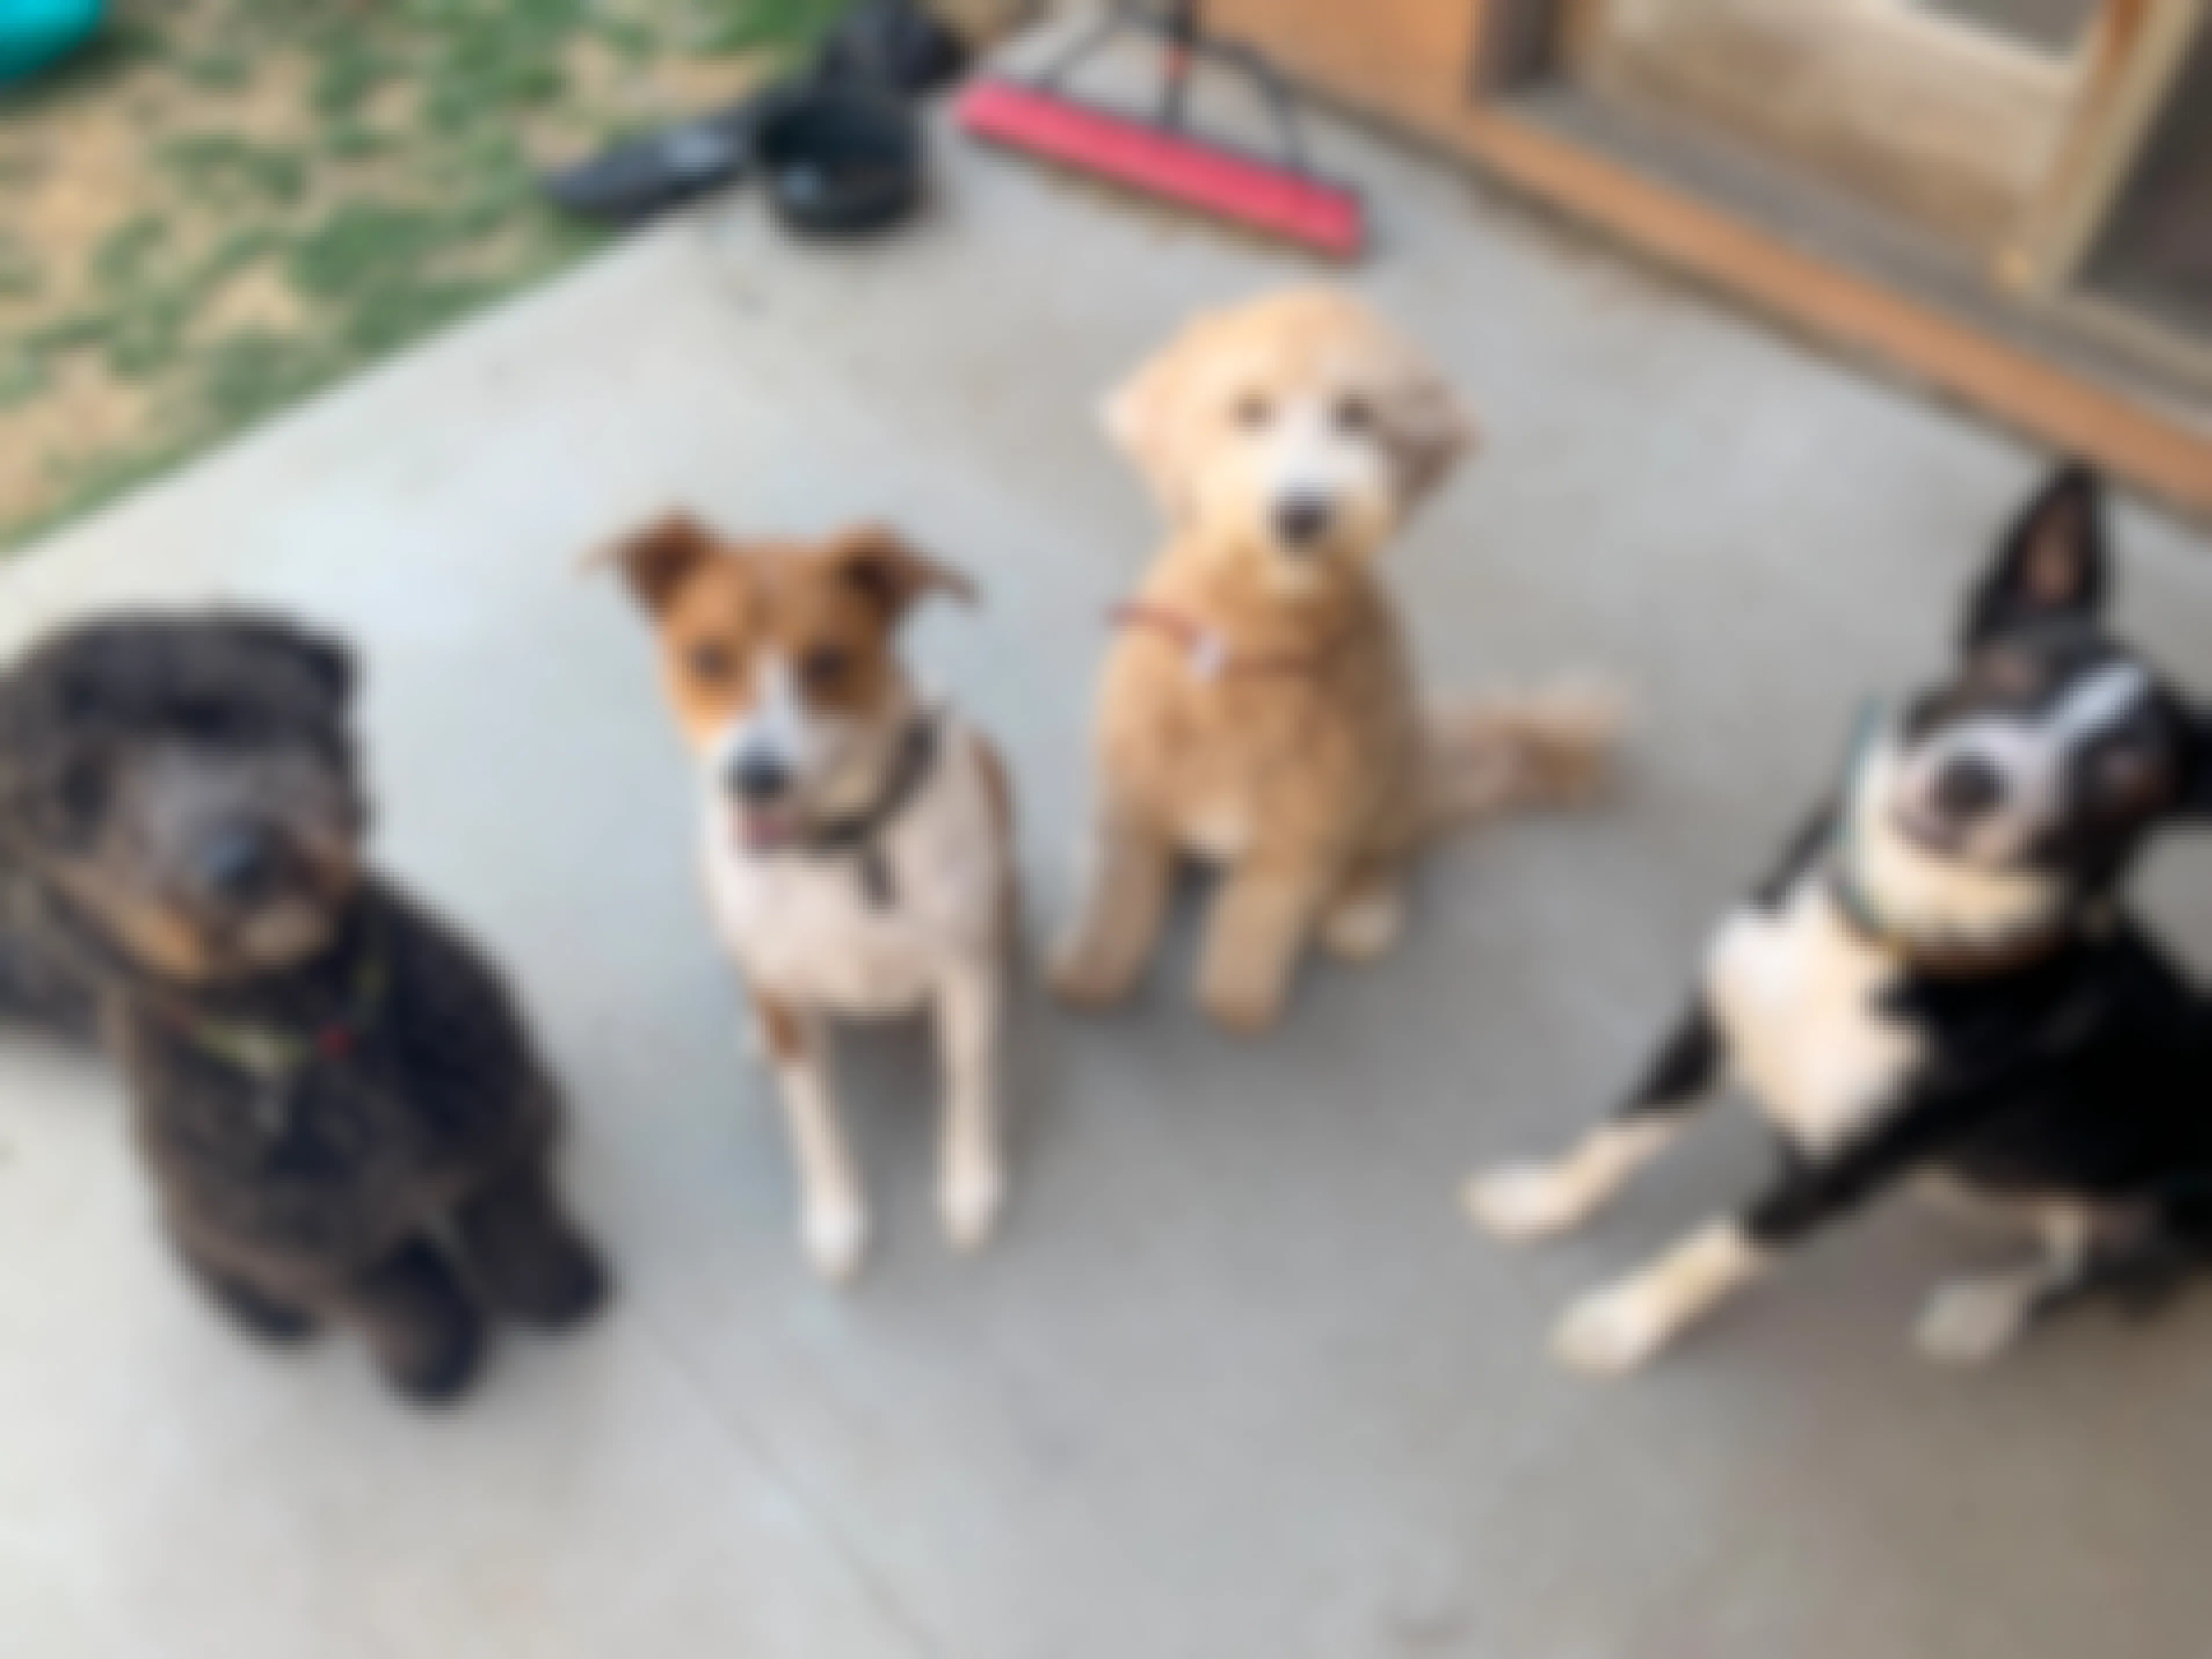 4 dogs sitting on a cement patio looking up at the camera. All 4 dogs are different breeds.